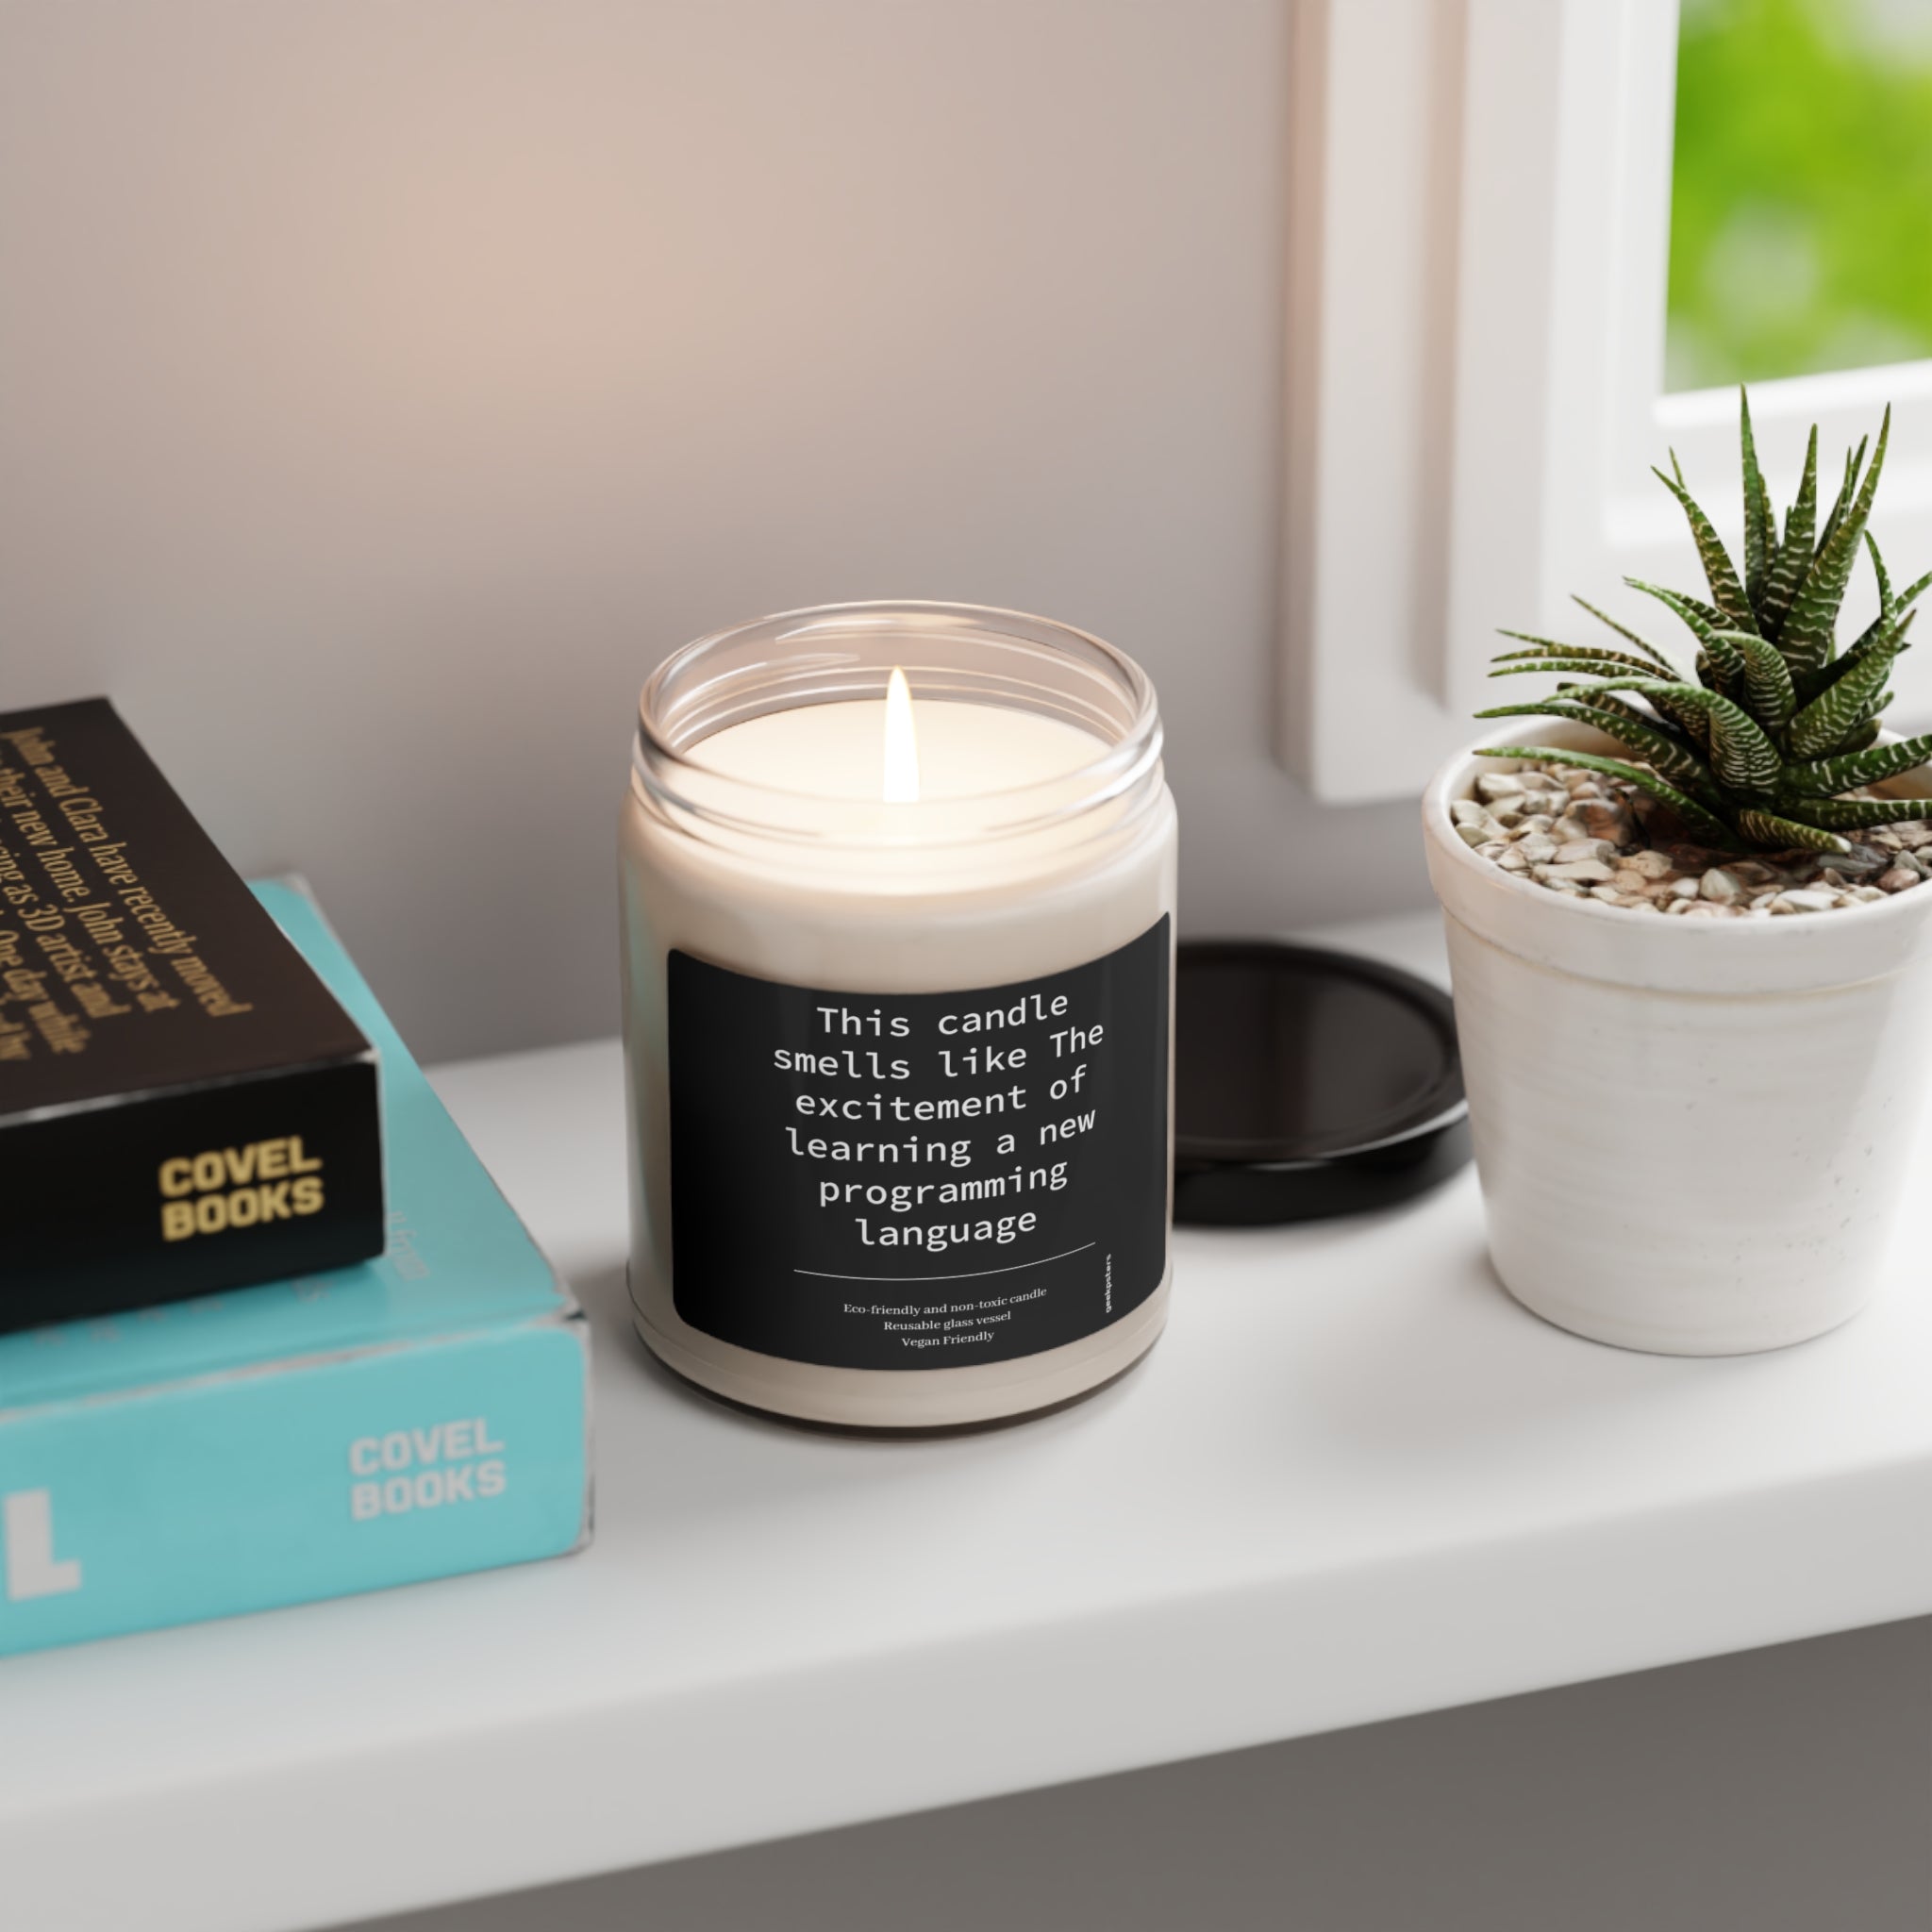 A "This Candle Smells Like The Excitement of Learning a New Programming Language - Scented Soy Candle, 9oz" on a windowsill next to a potted succulent and a stack of books, with a label reading "this candle smells like the excitement of learning a new programming language.